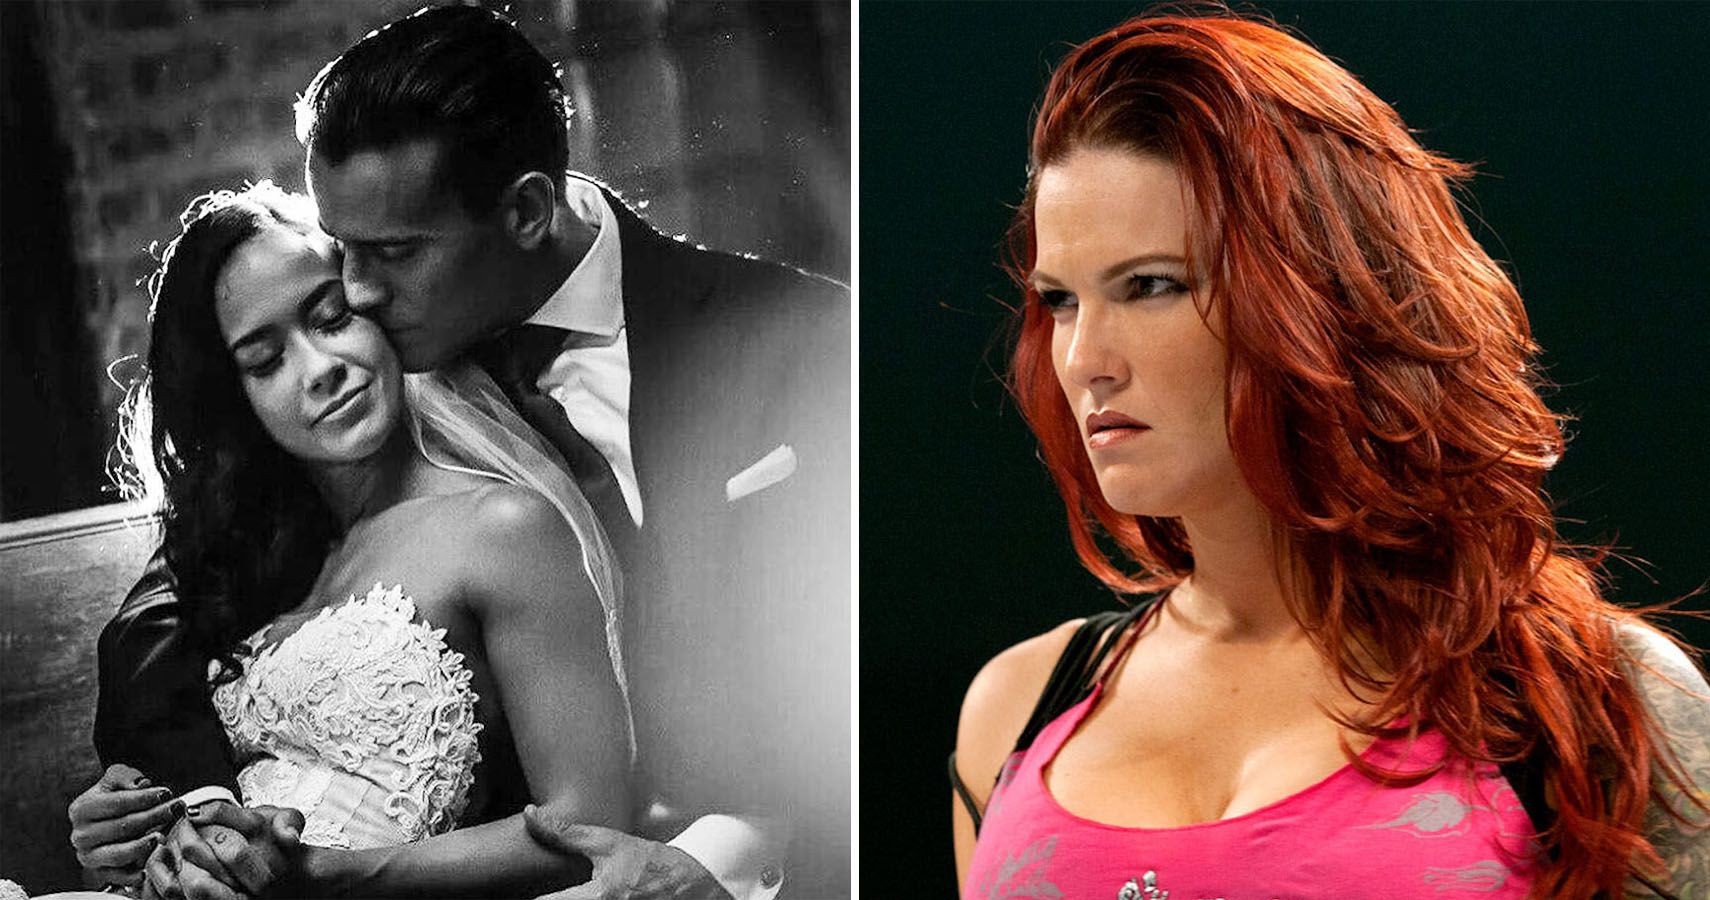 Top 15 Things You Didn't Know About CM Punk And AJ Lee's Relationship